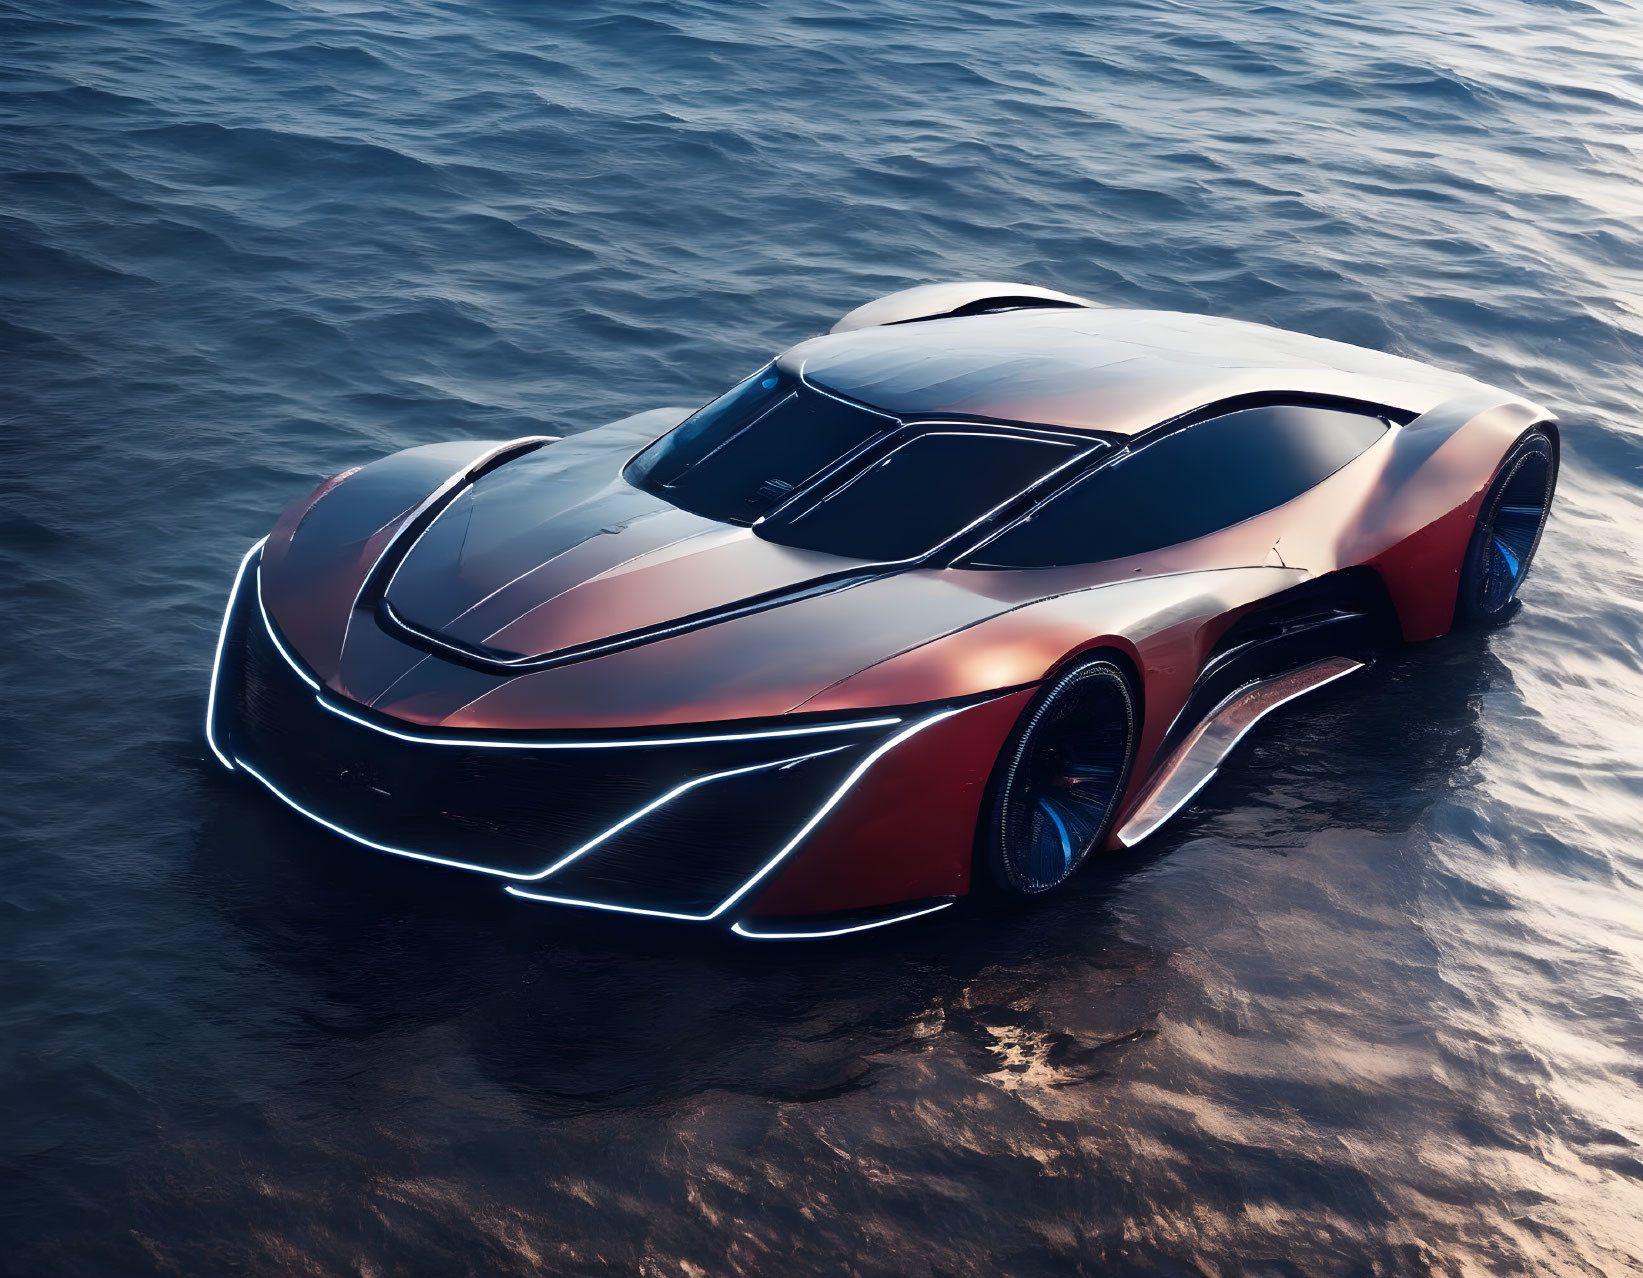 Sleek Red and Black Futuristic Sports Car by Water at Dusk